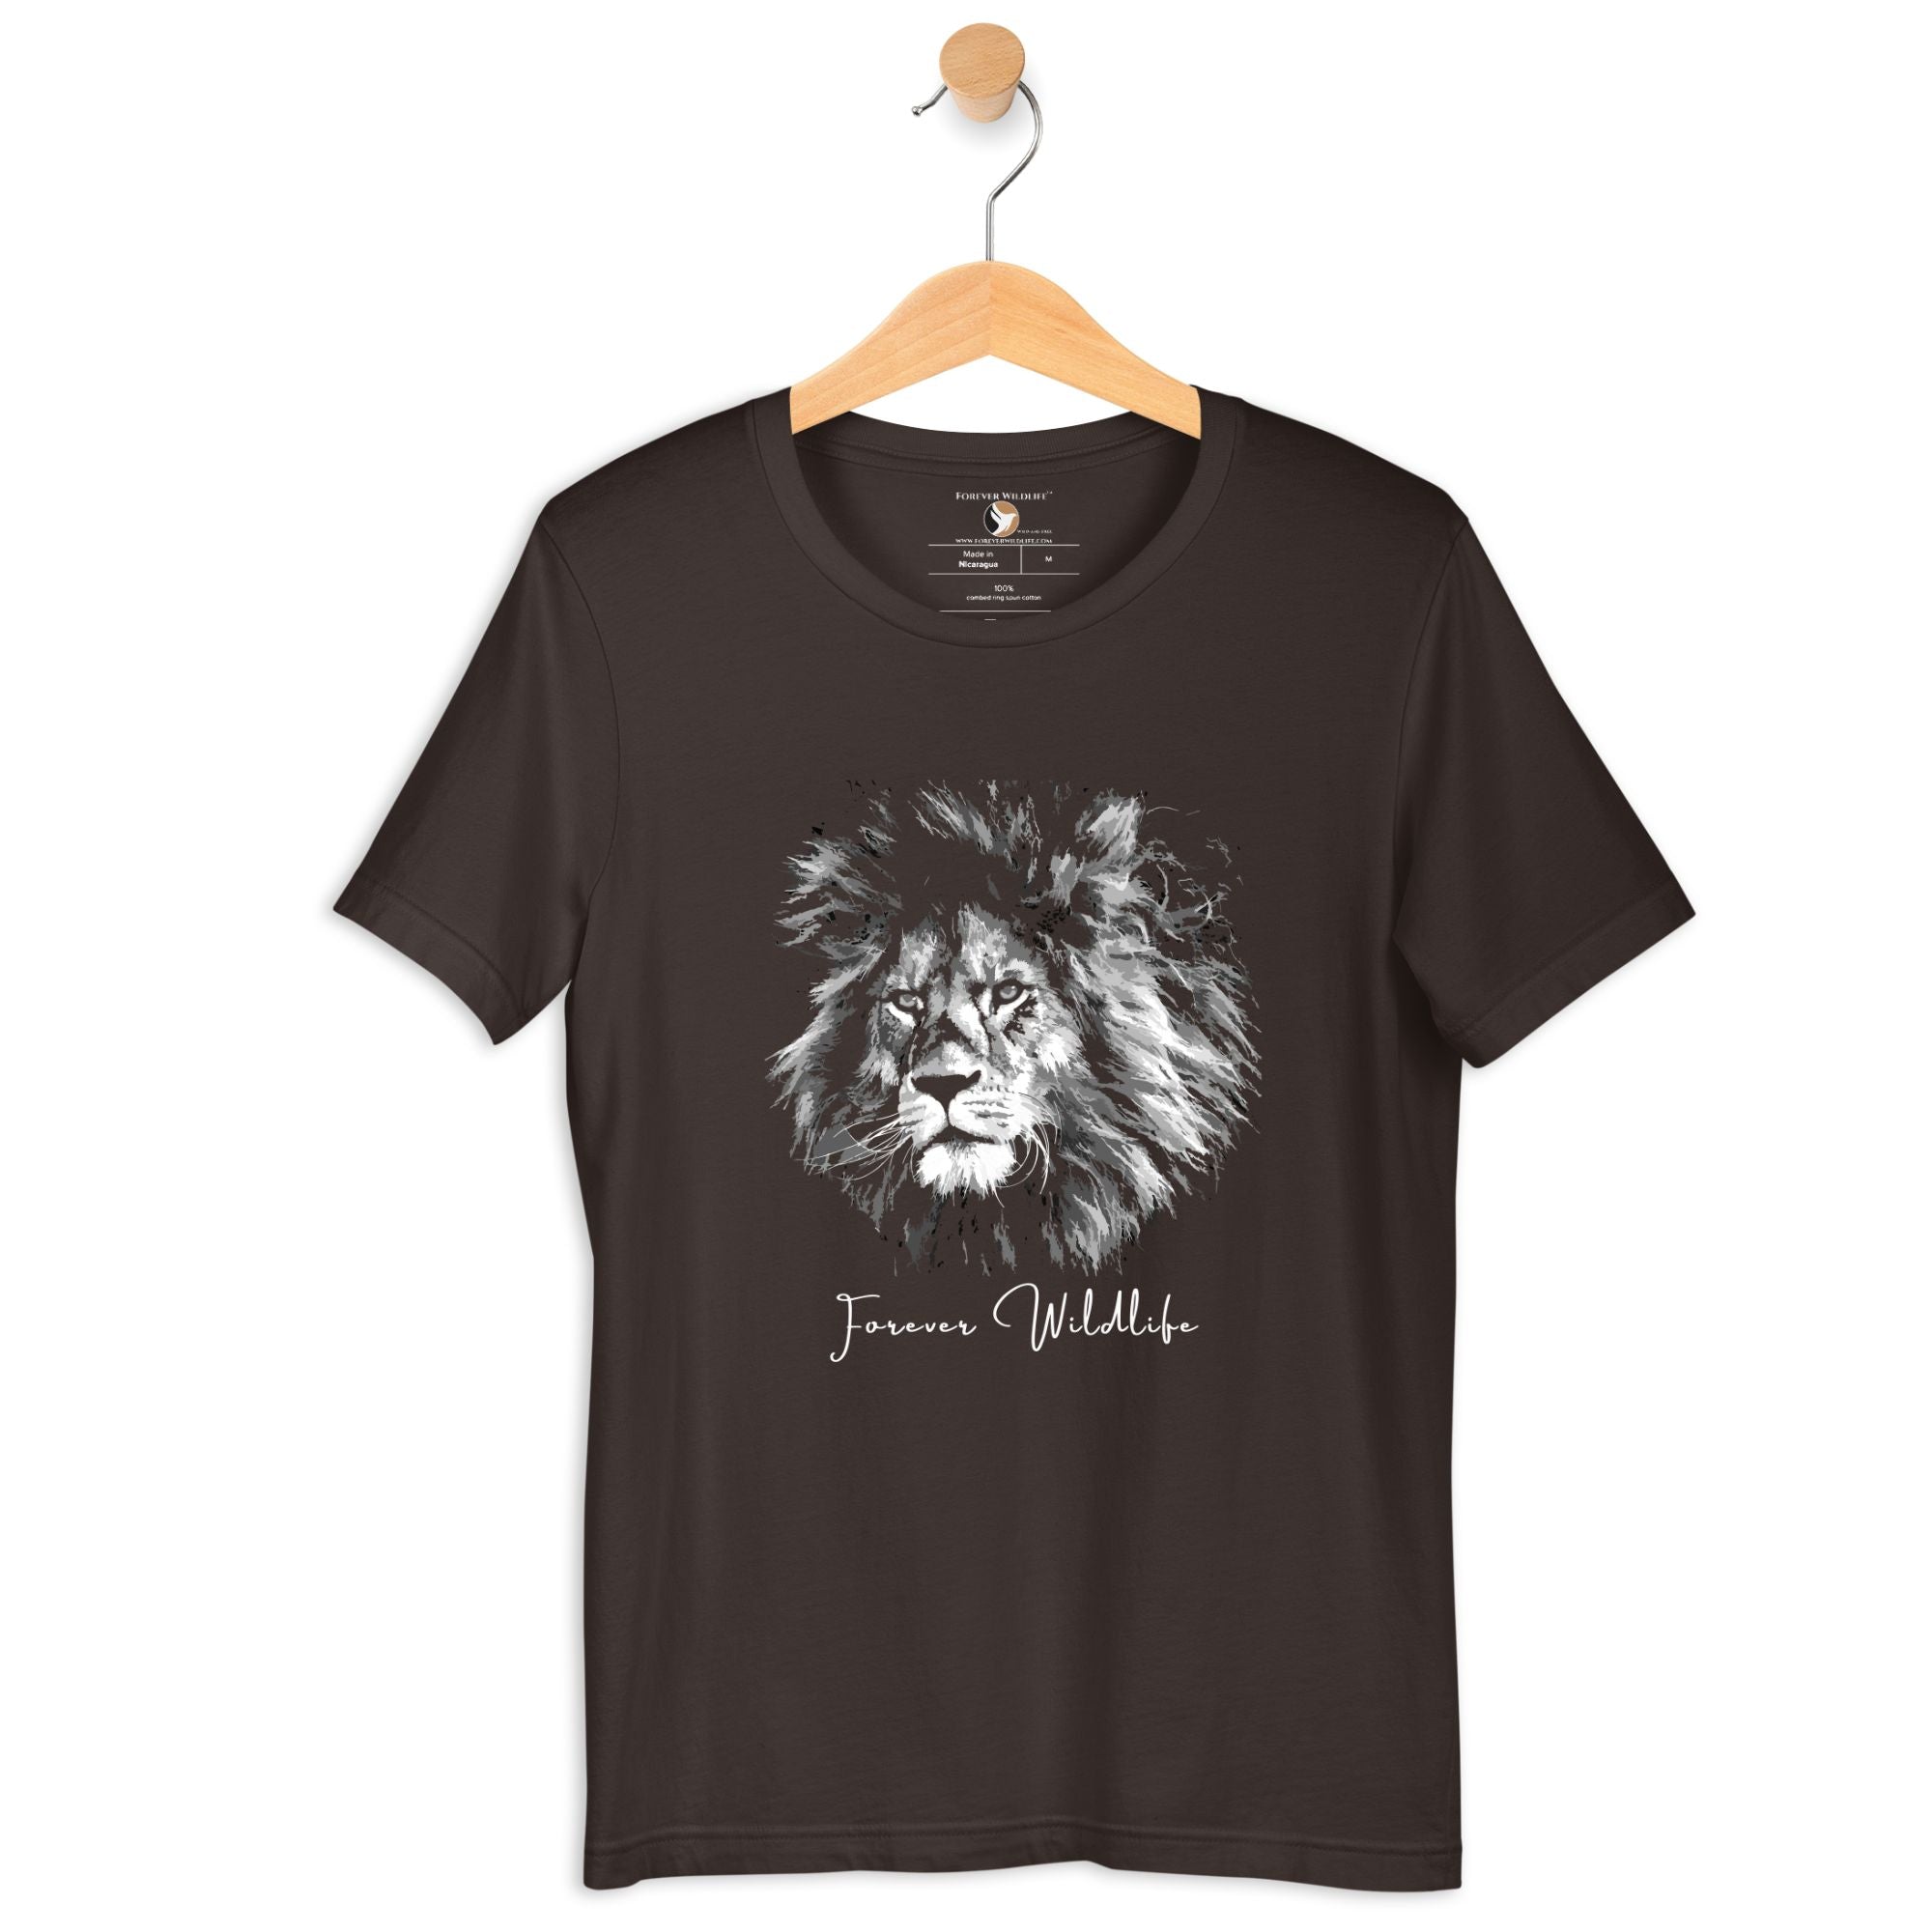 Lion T-Shirt in Brown – Premium Wildlife T-Shirt Design, Wildlife Clothing & Apparel from Forever Wildlife